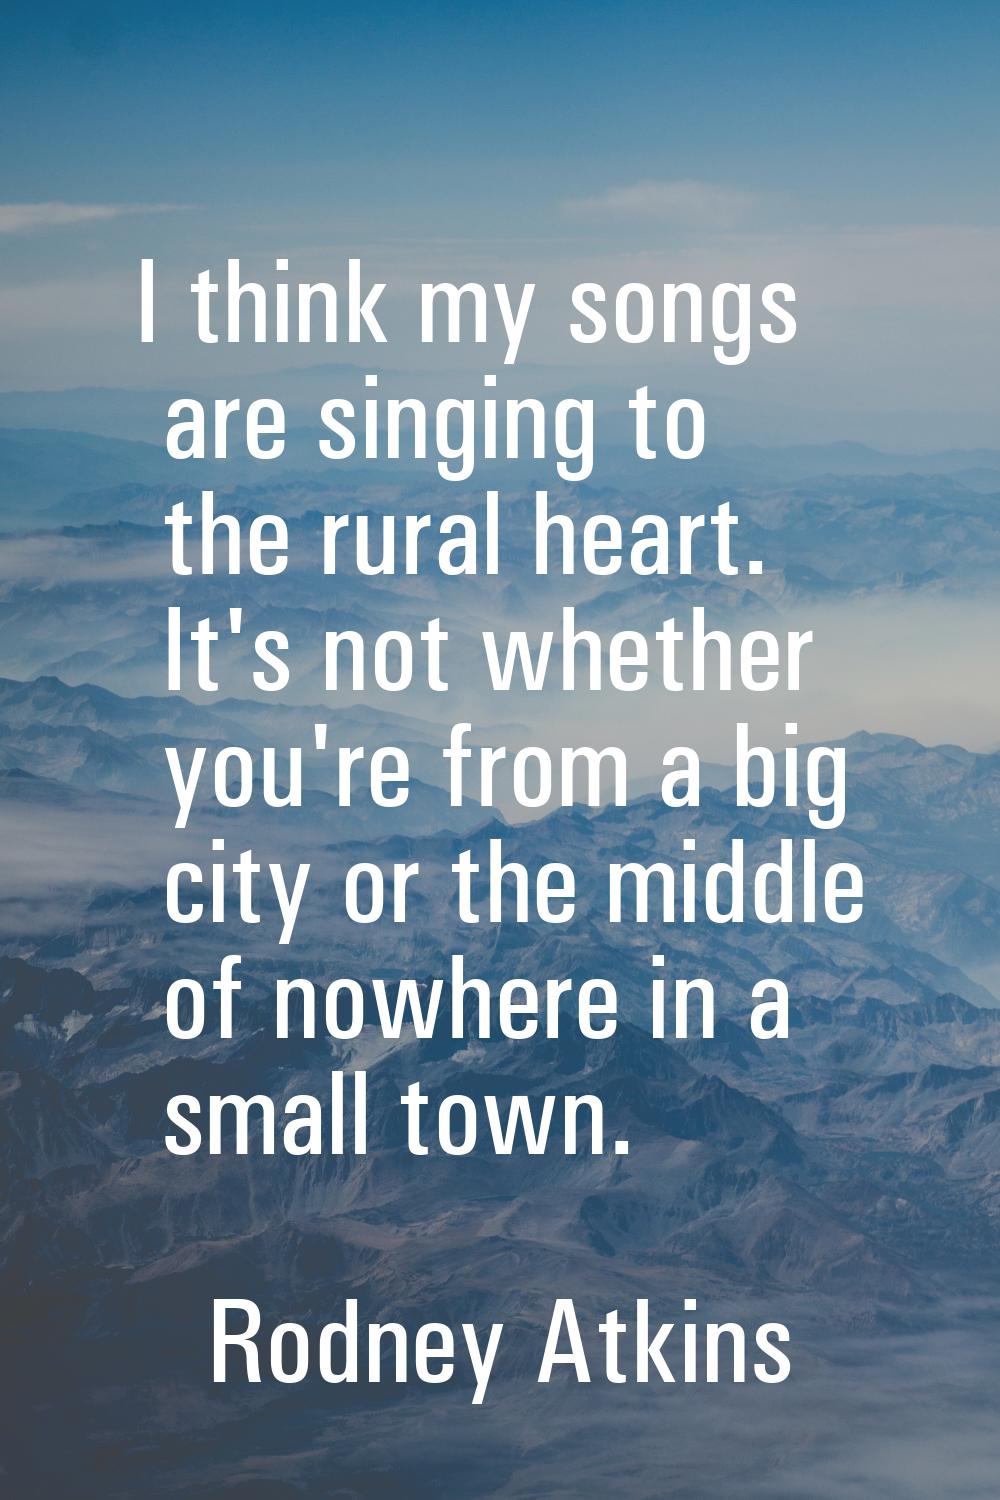 I think my songs are singing to the rural heart. It's not whether you're from a big city or the mid